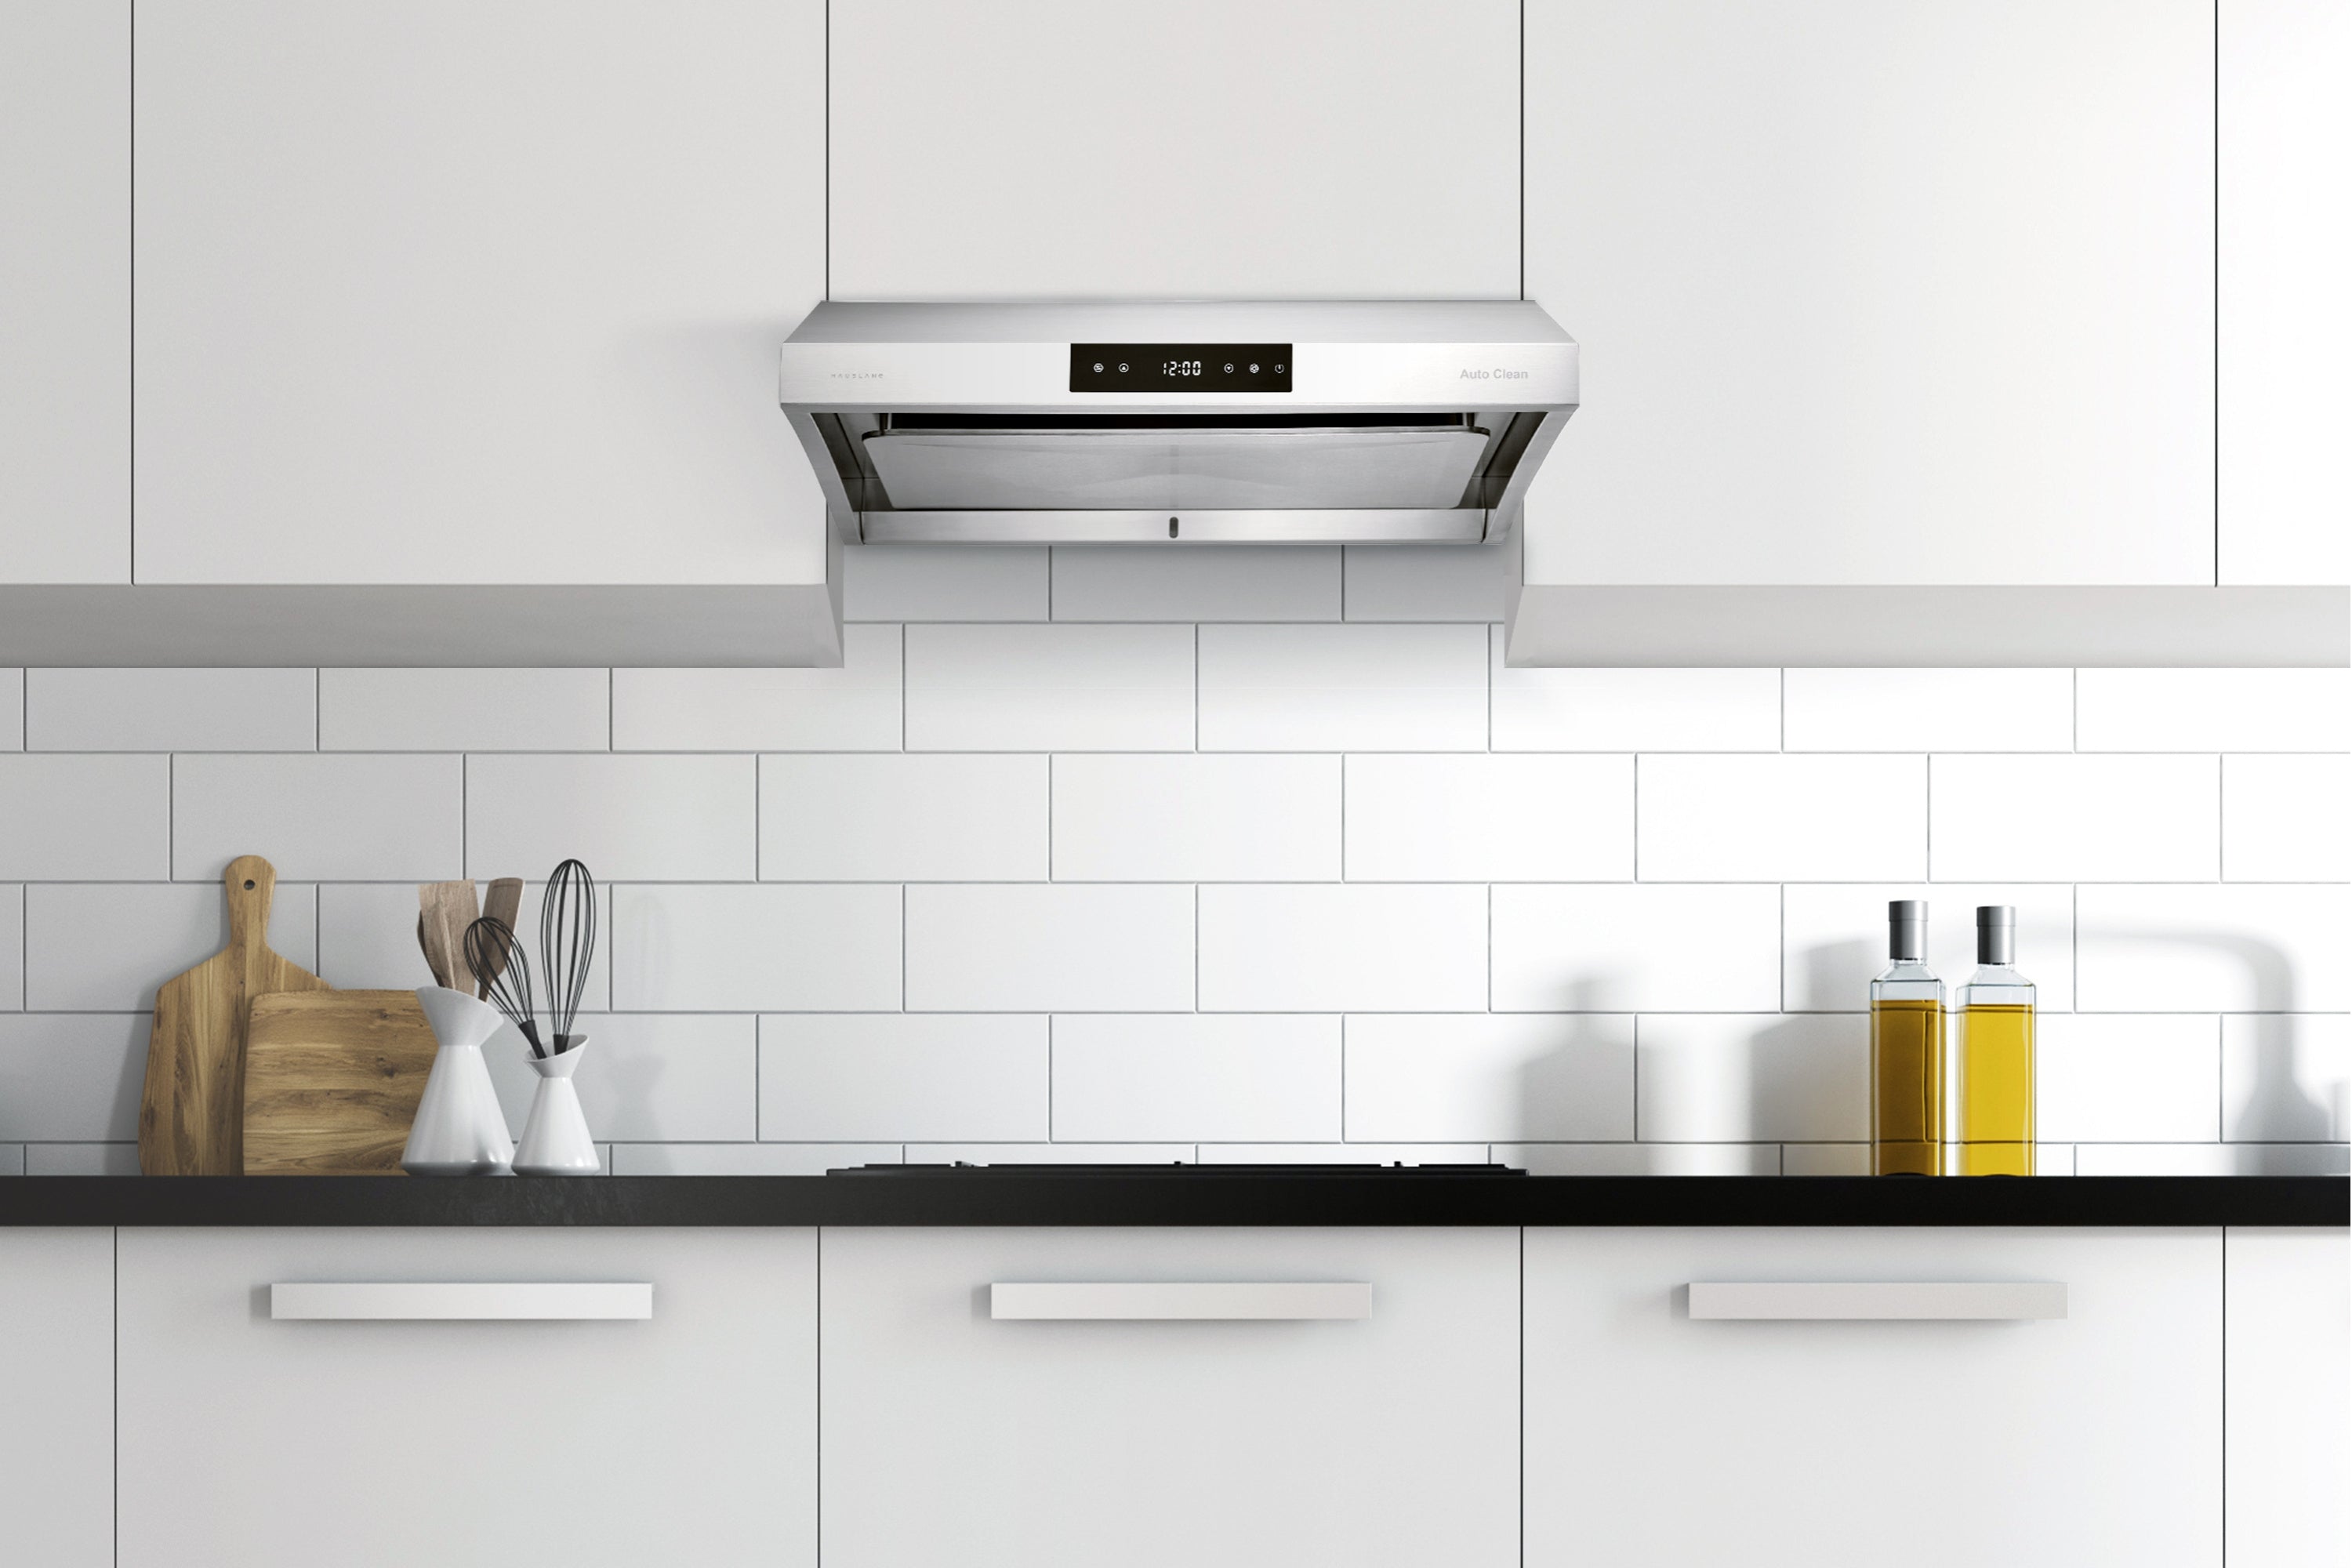 How to Install Hauslane's PS38 Range Hood: A Step-by-Step Guide